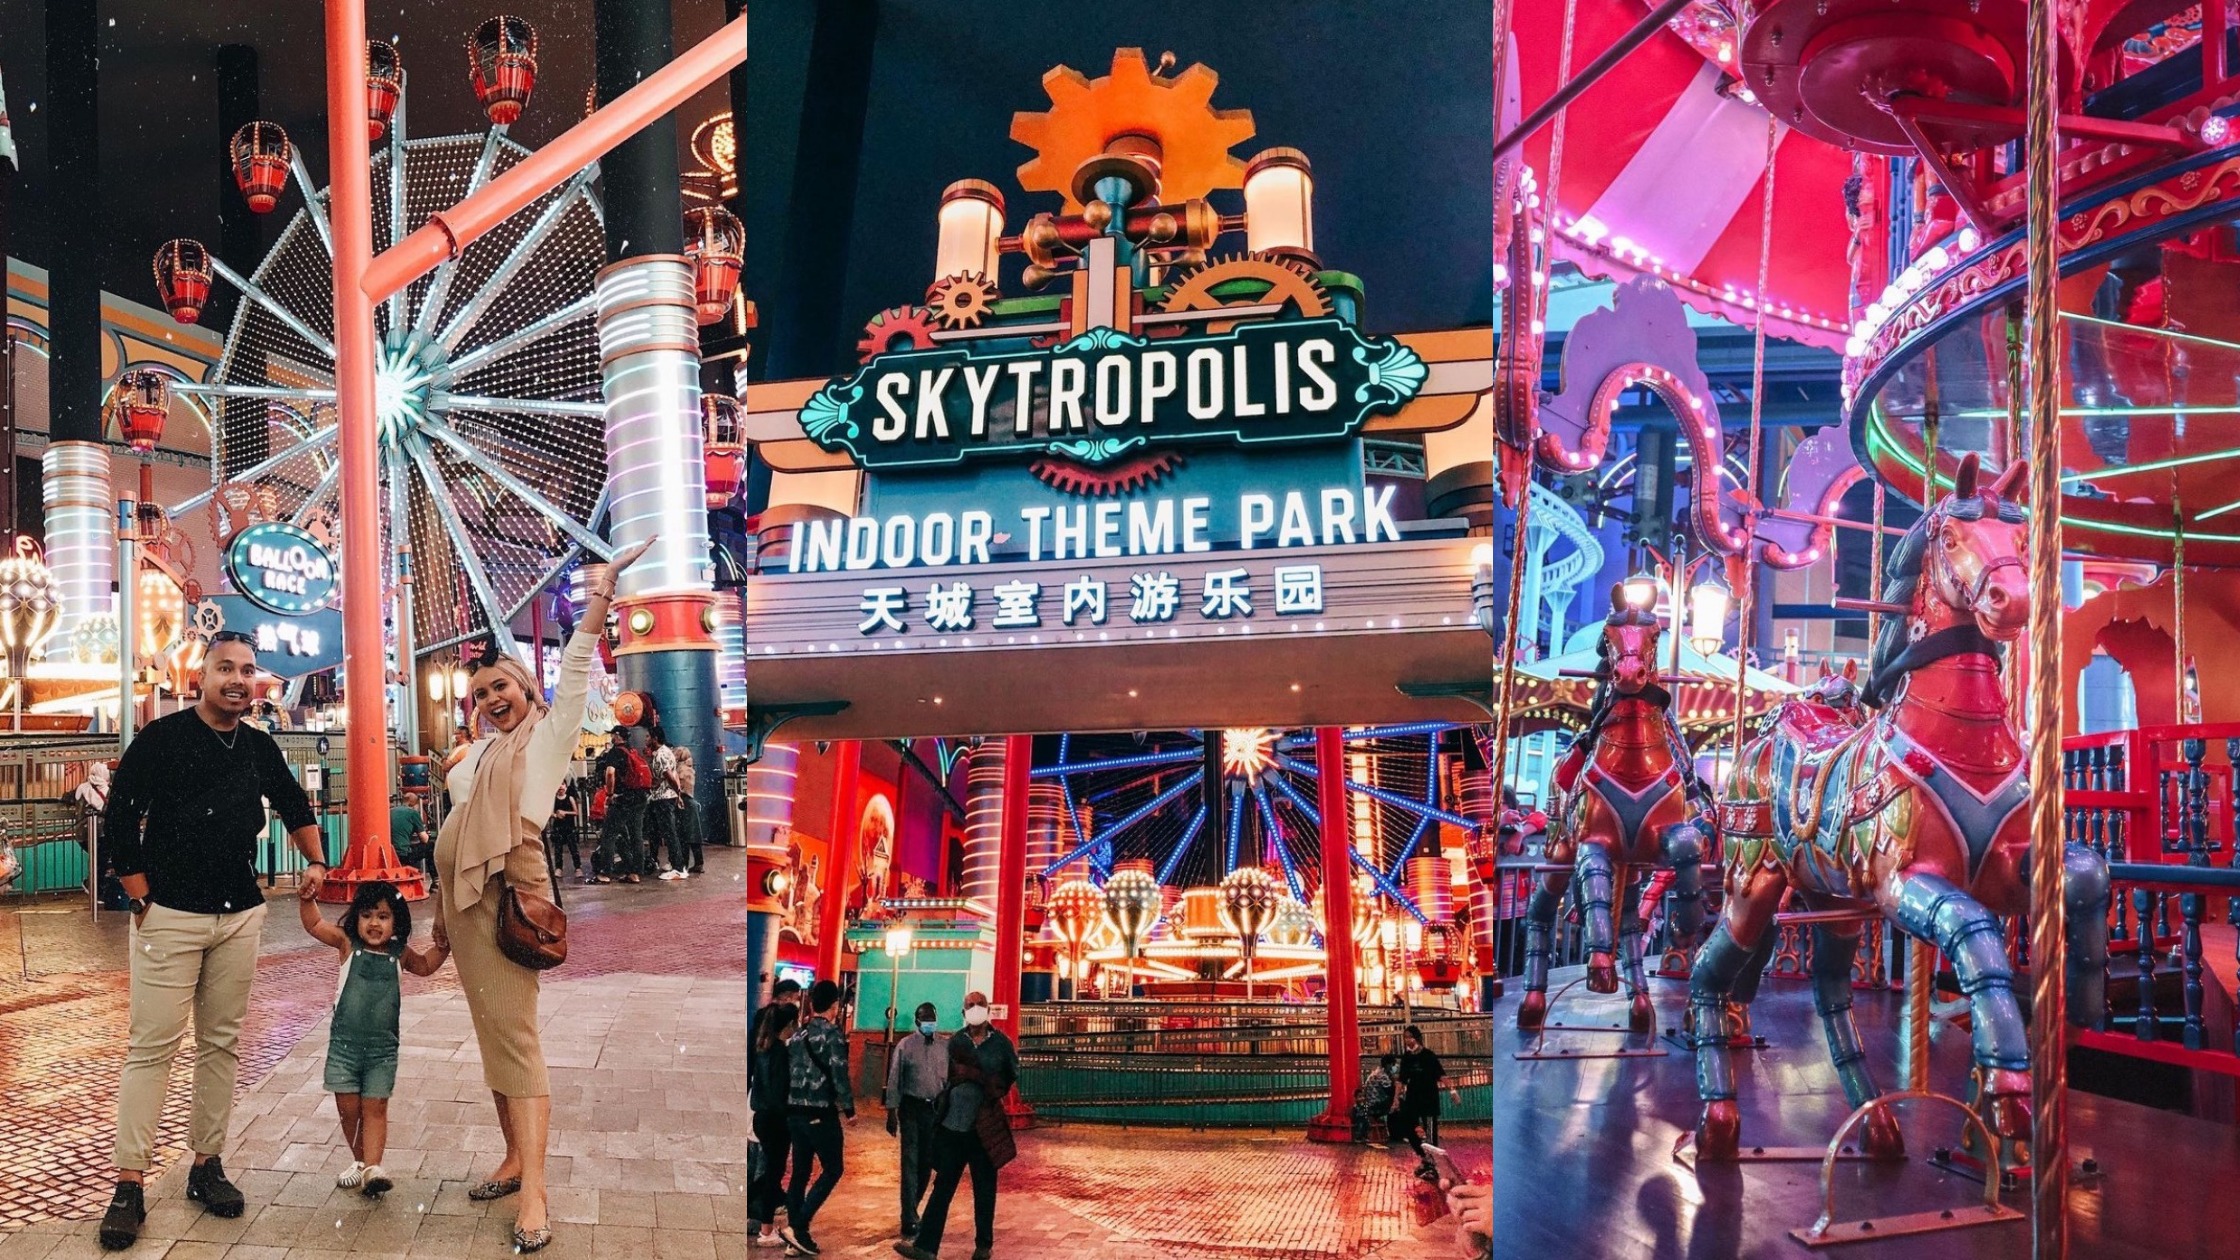 Skytropolis Genting Indoor Theme Park Guide 2022: Opening Hours, Ticket